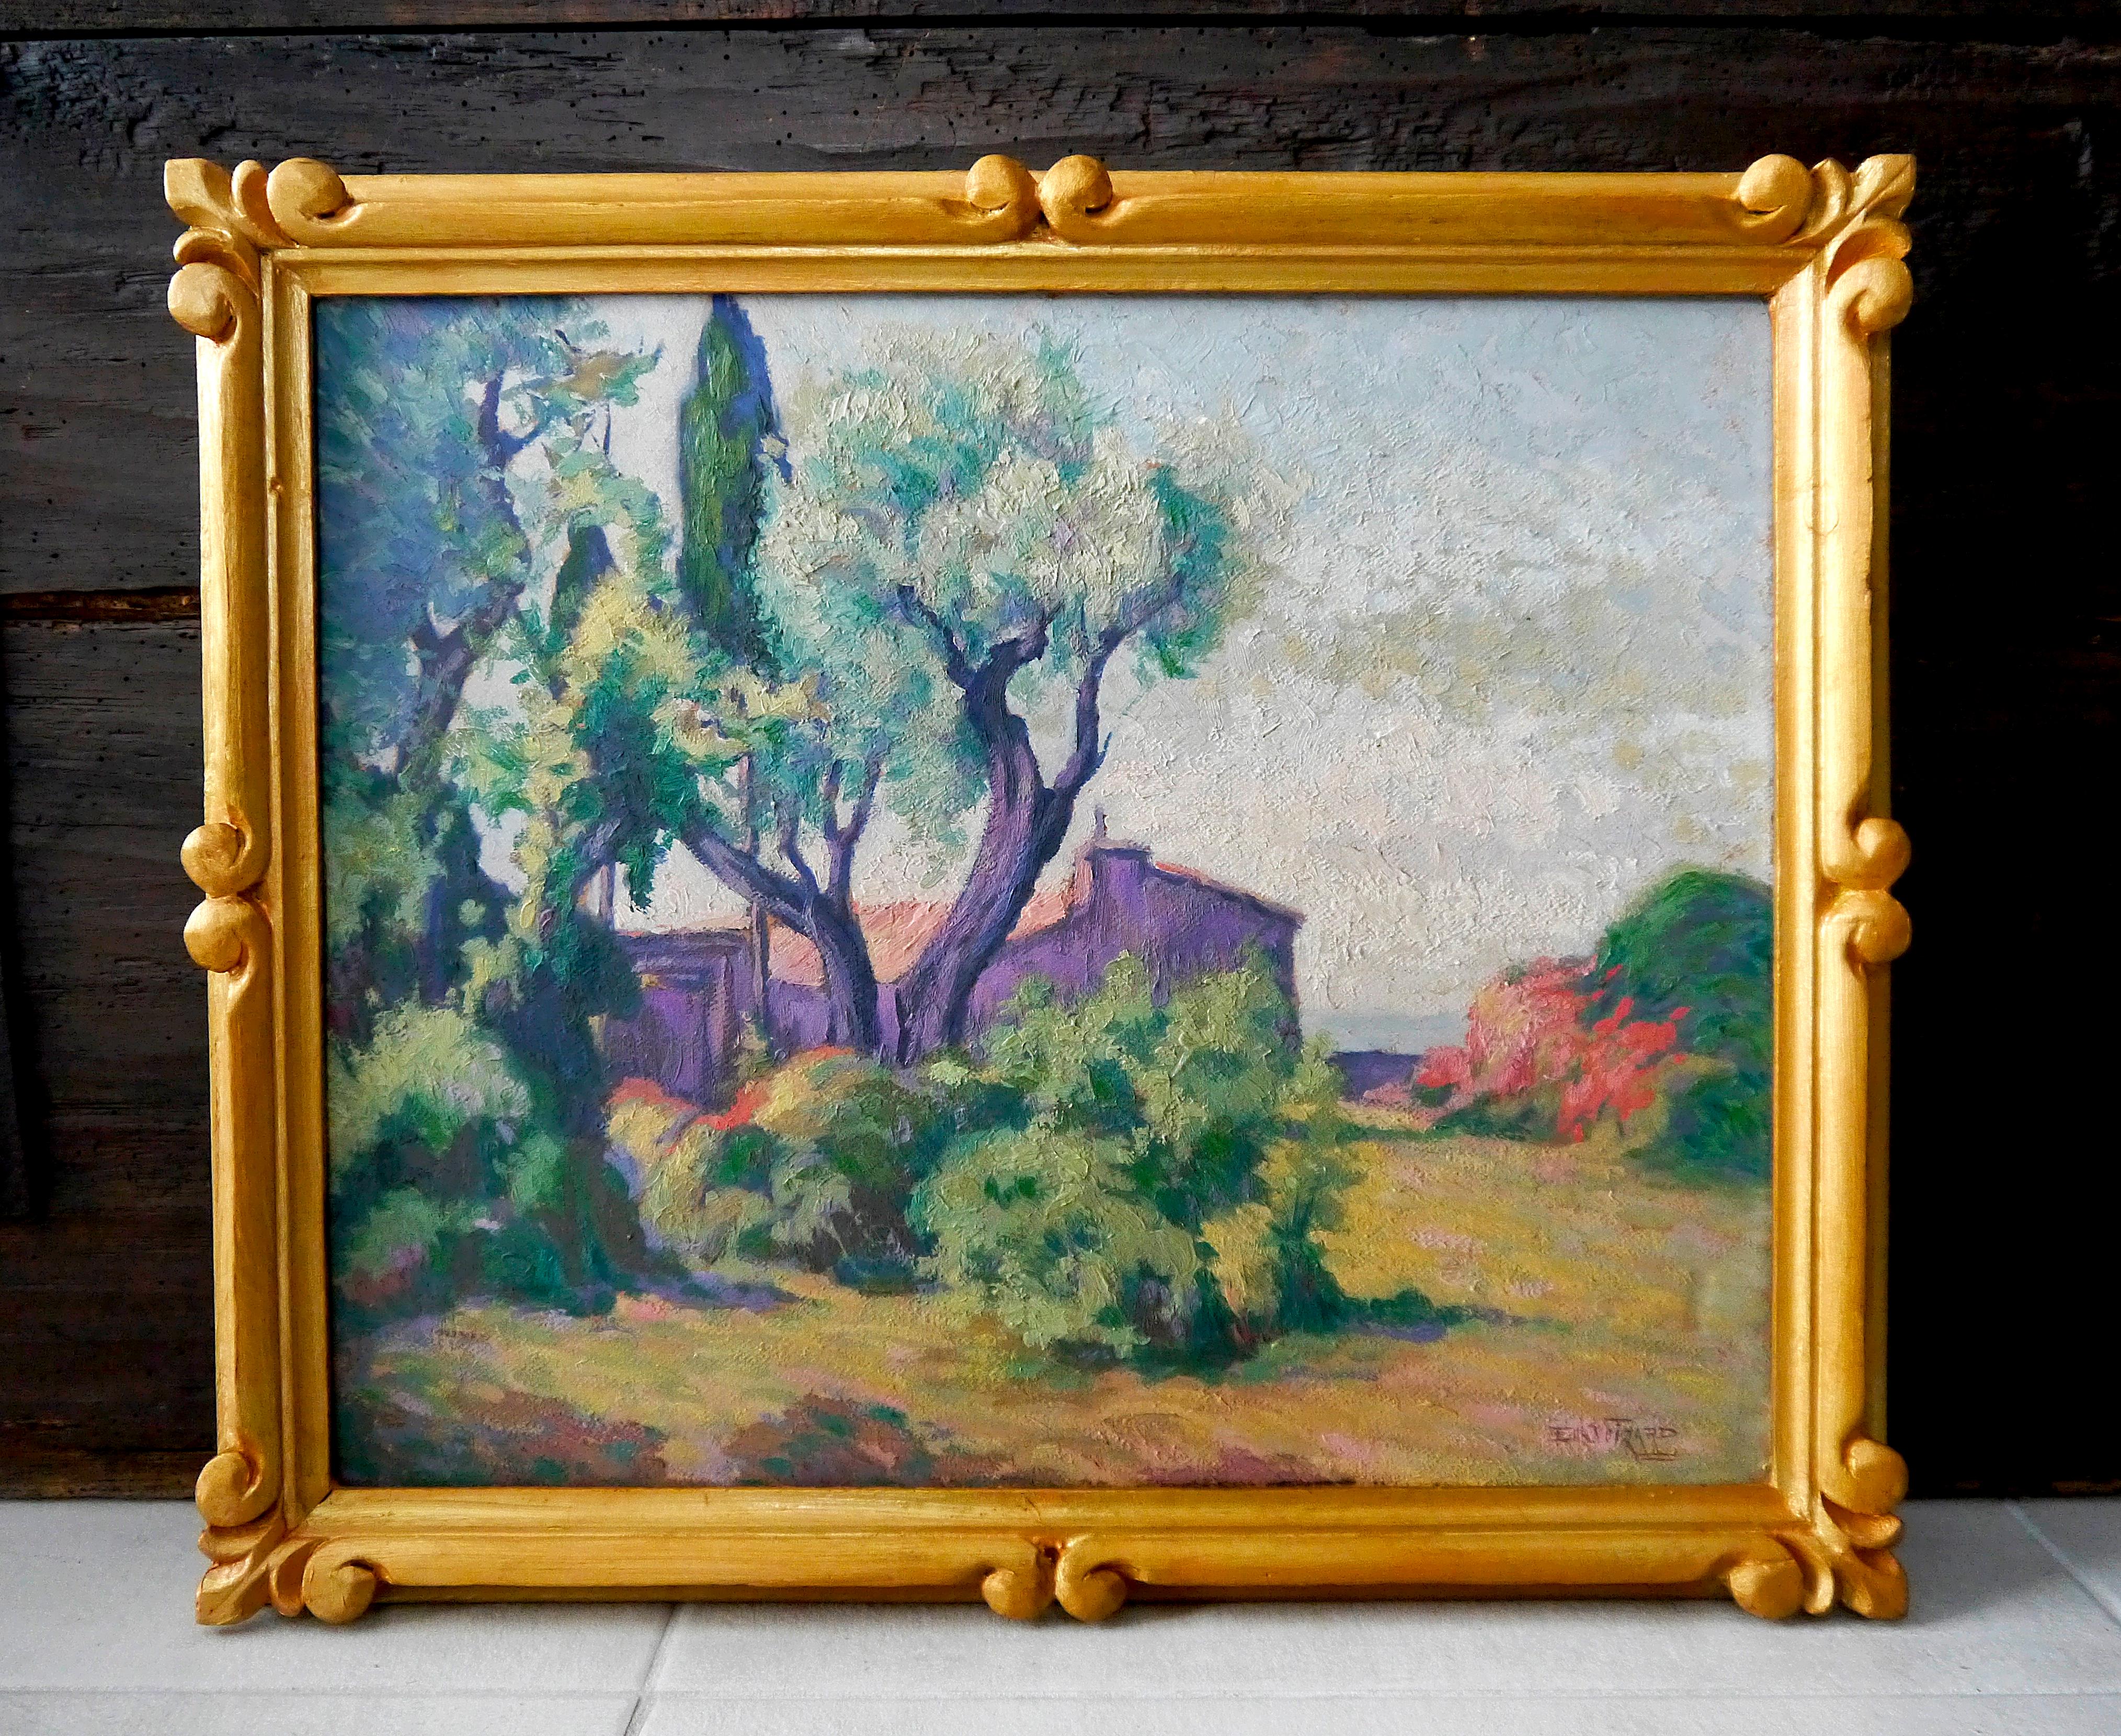 20th Century French Post Impressionism Provence Oil painting Signed  1925 - Impressionist Painting by French School Old Masters